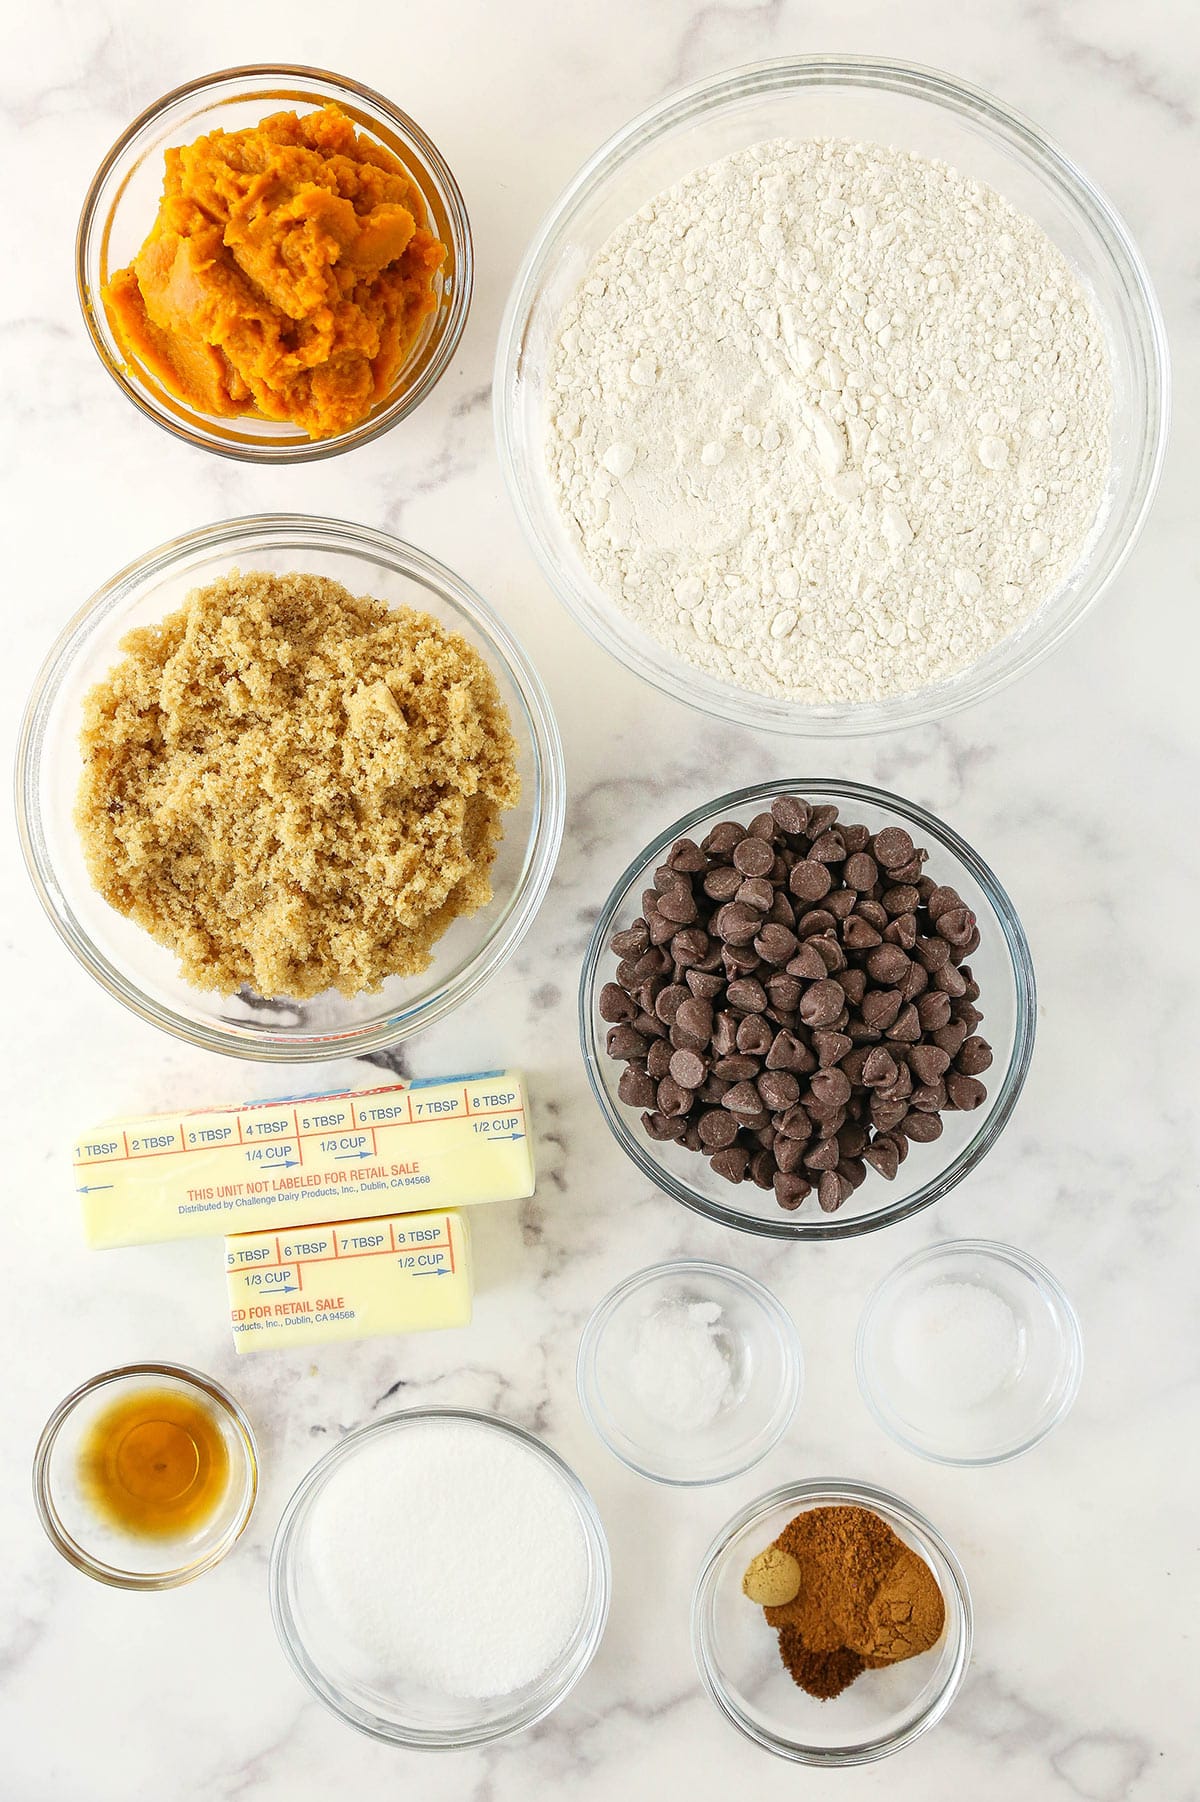 Pumpkin chocolate chip cookie ingredients on a marble countertop.